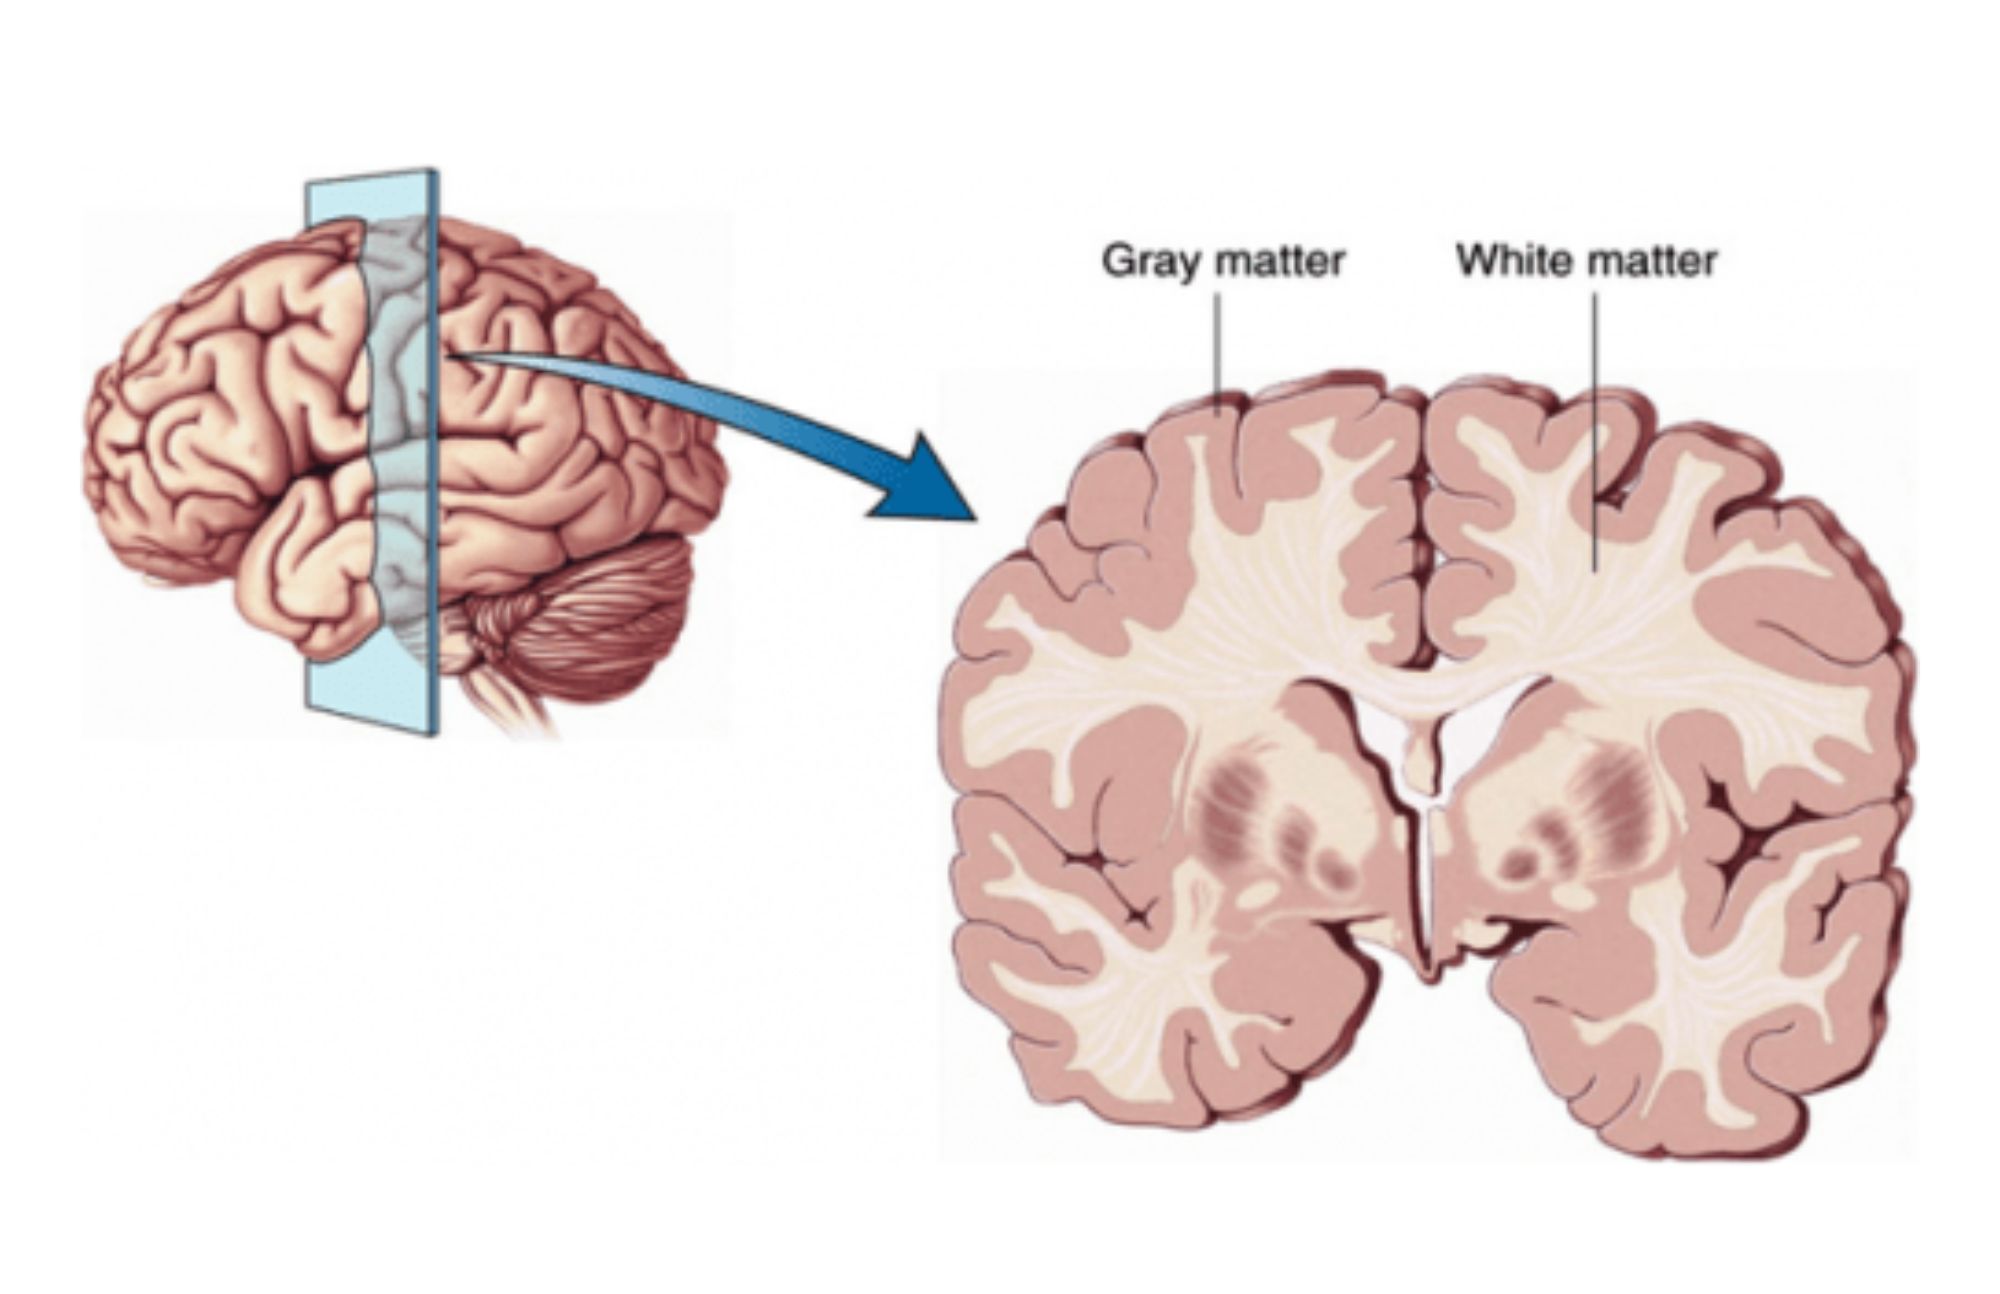 A whole human brain is shown on the left, while a cross section of a brain showing gray and white matter is shown on the right